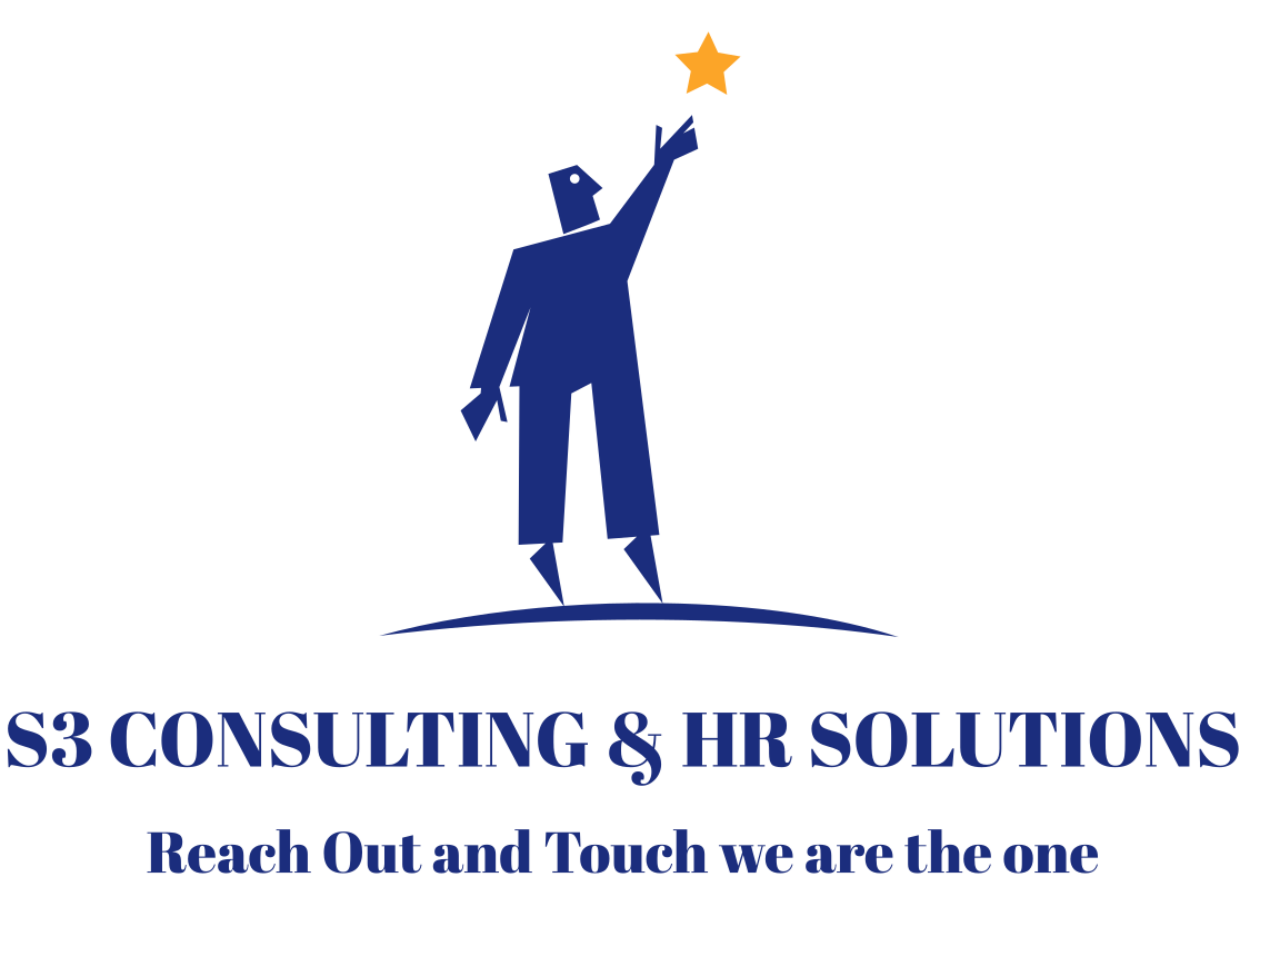 S3 CONSULTING & HR SOLUTIONS's logo